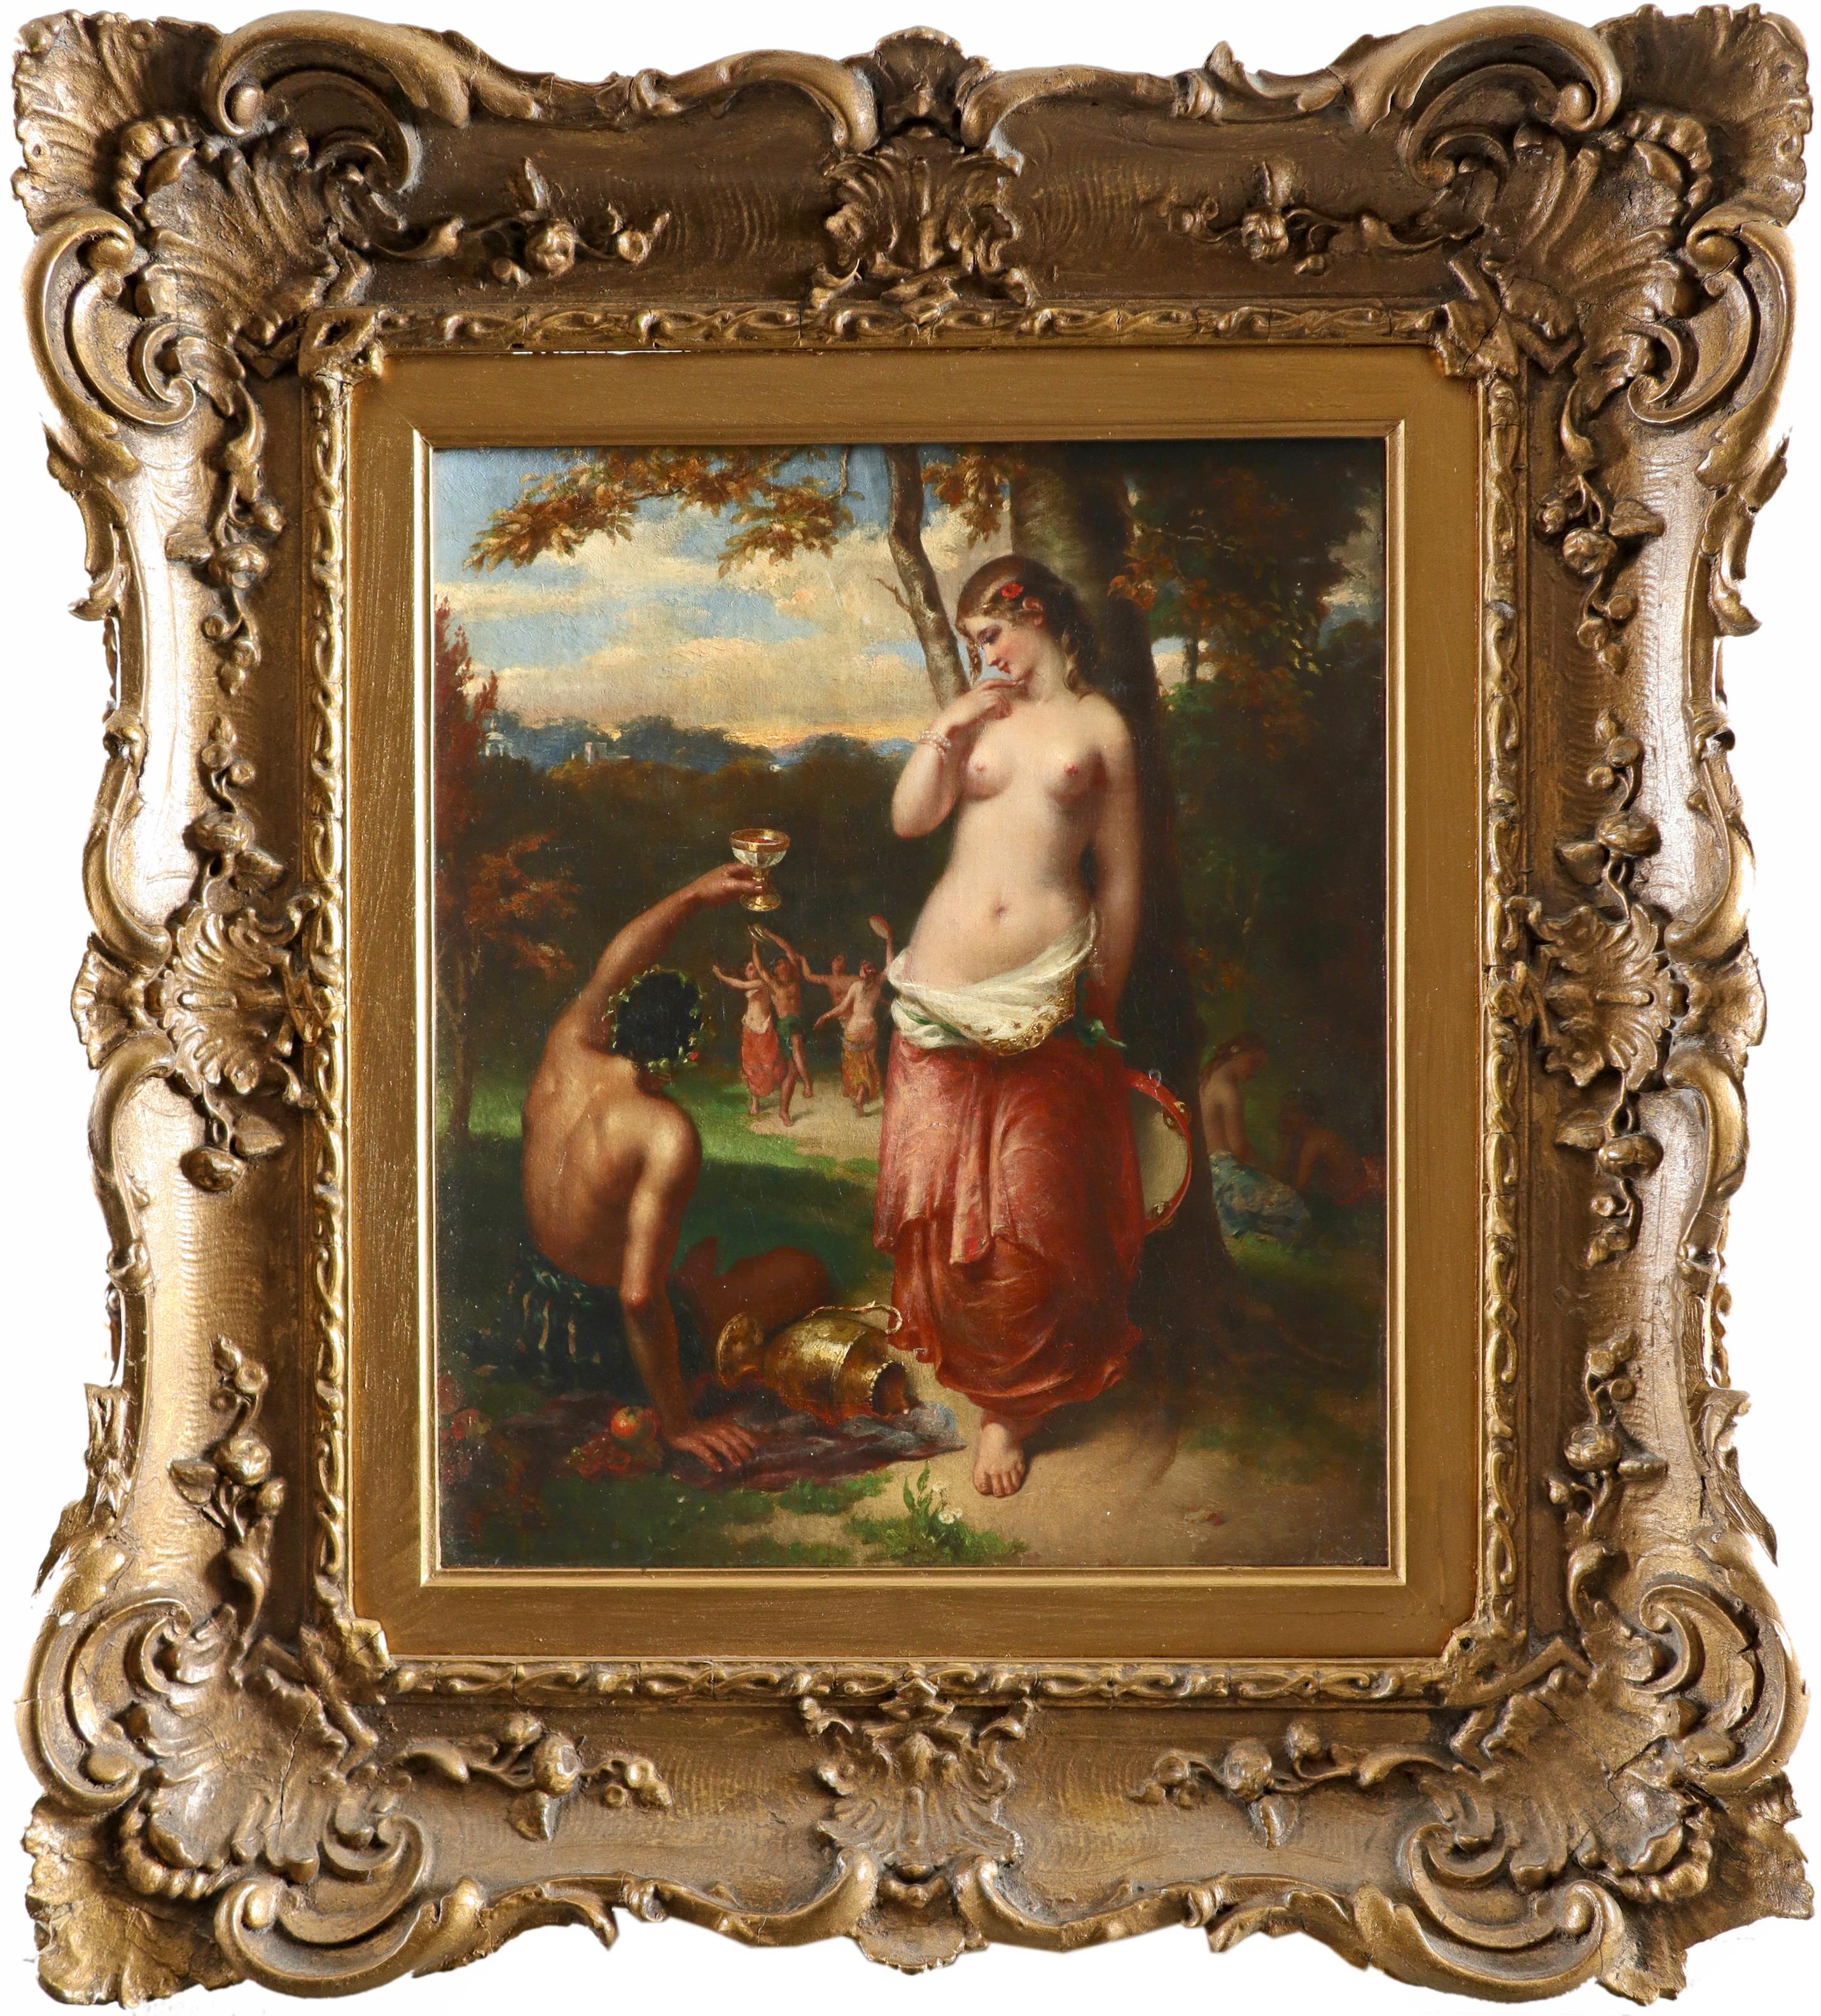 Follower of William Edward Frost Bacchus and Ariadne Oil on canvas 35.6 x 30.8cm; 14 x 12¼in - Image 2 of 3